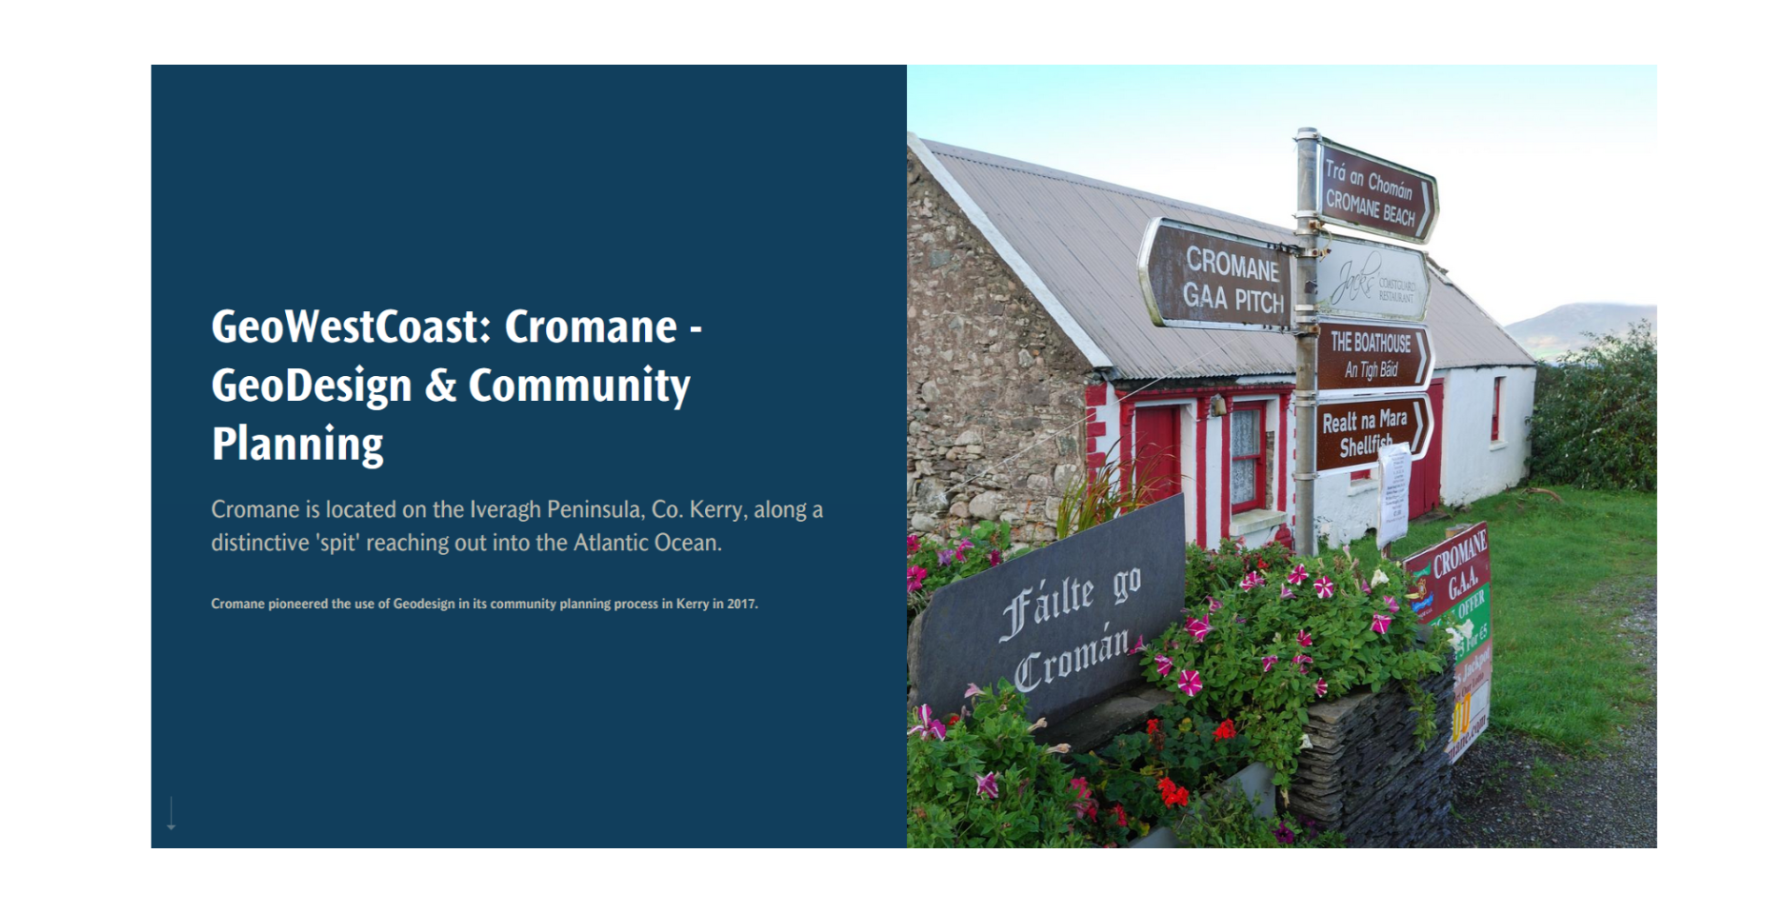 Cromane pioneered the use of Geodesign in its community planning process in Kerry in 2017.